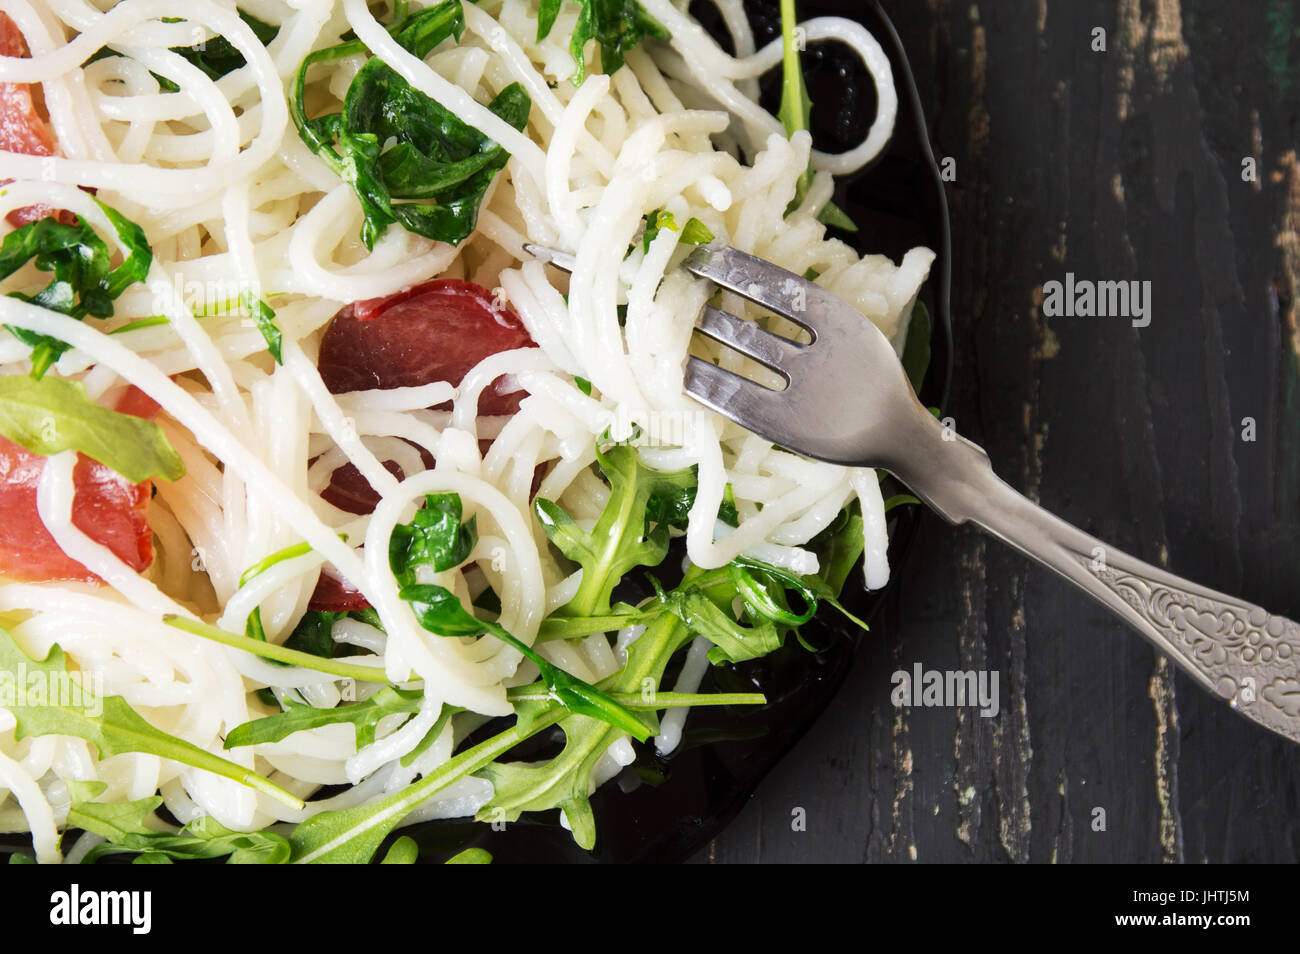 Pasta with prosciutto and arugula vegetable served on a plate Stock Photo